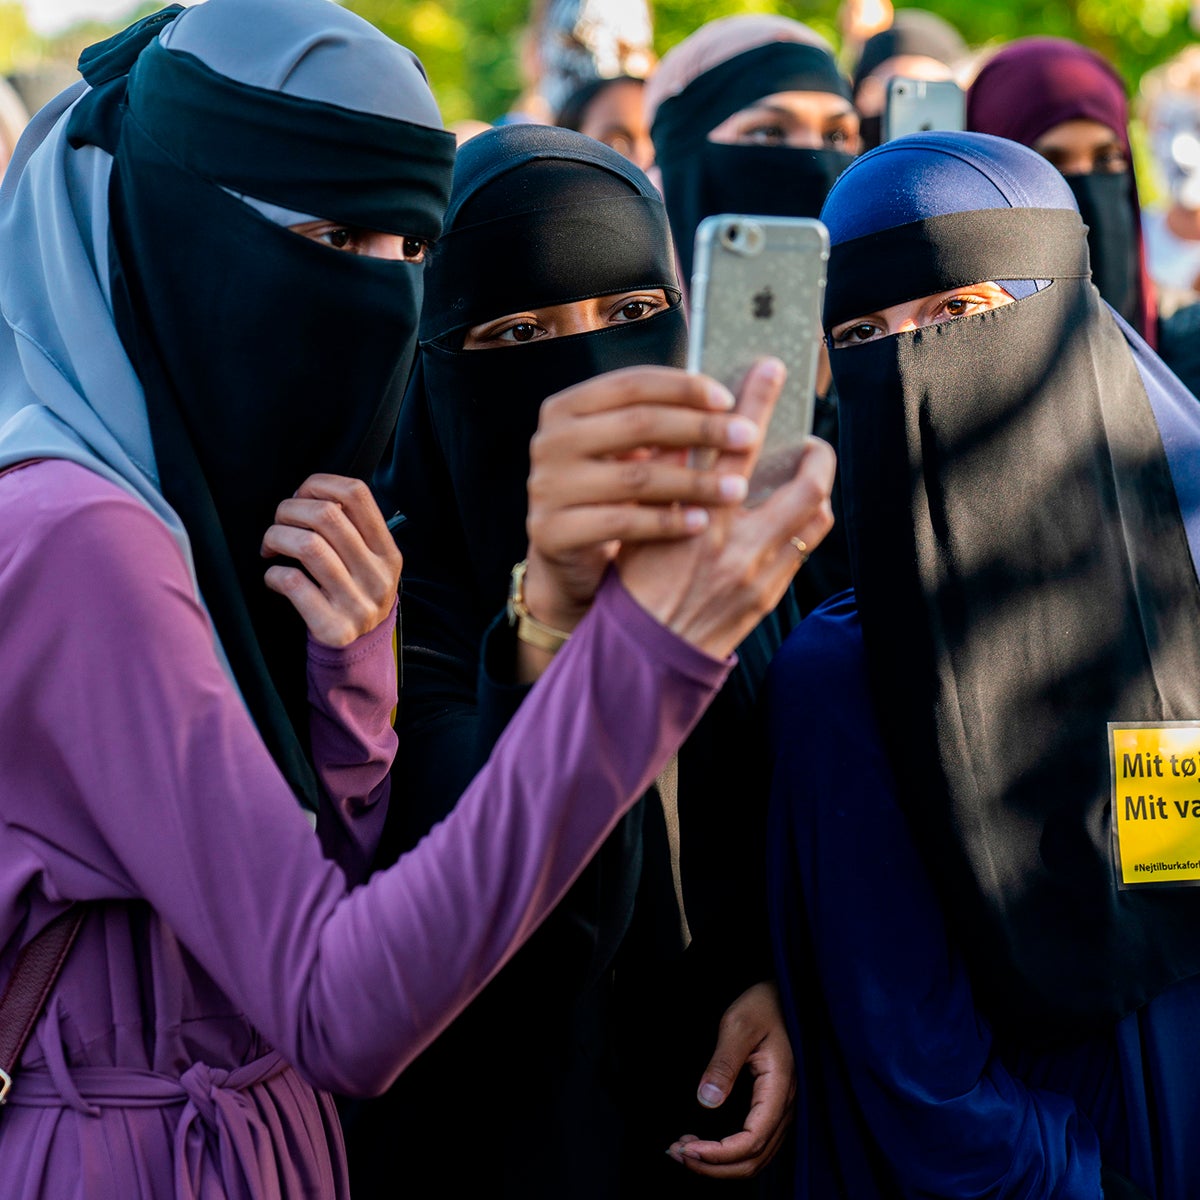 The Dutch 'burqa ban' with reality, and should make governments think again about policing | The Independent | The Independent